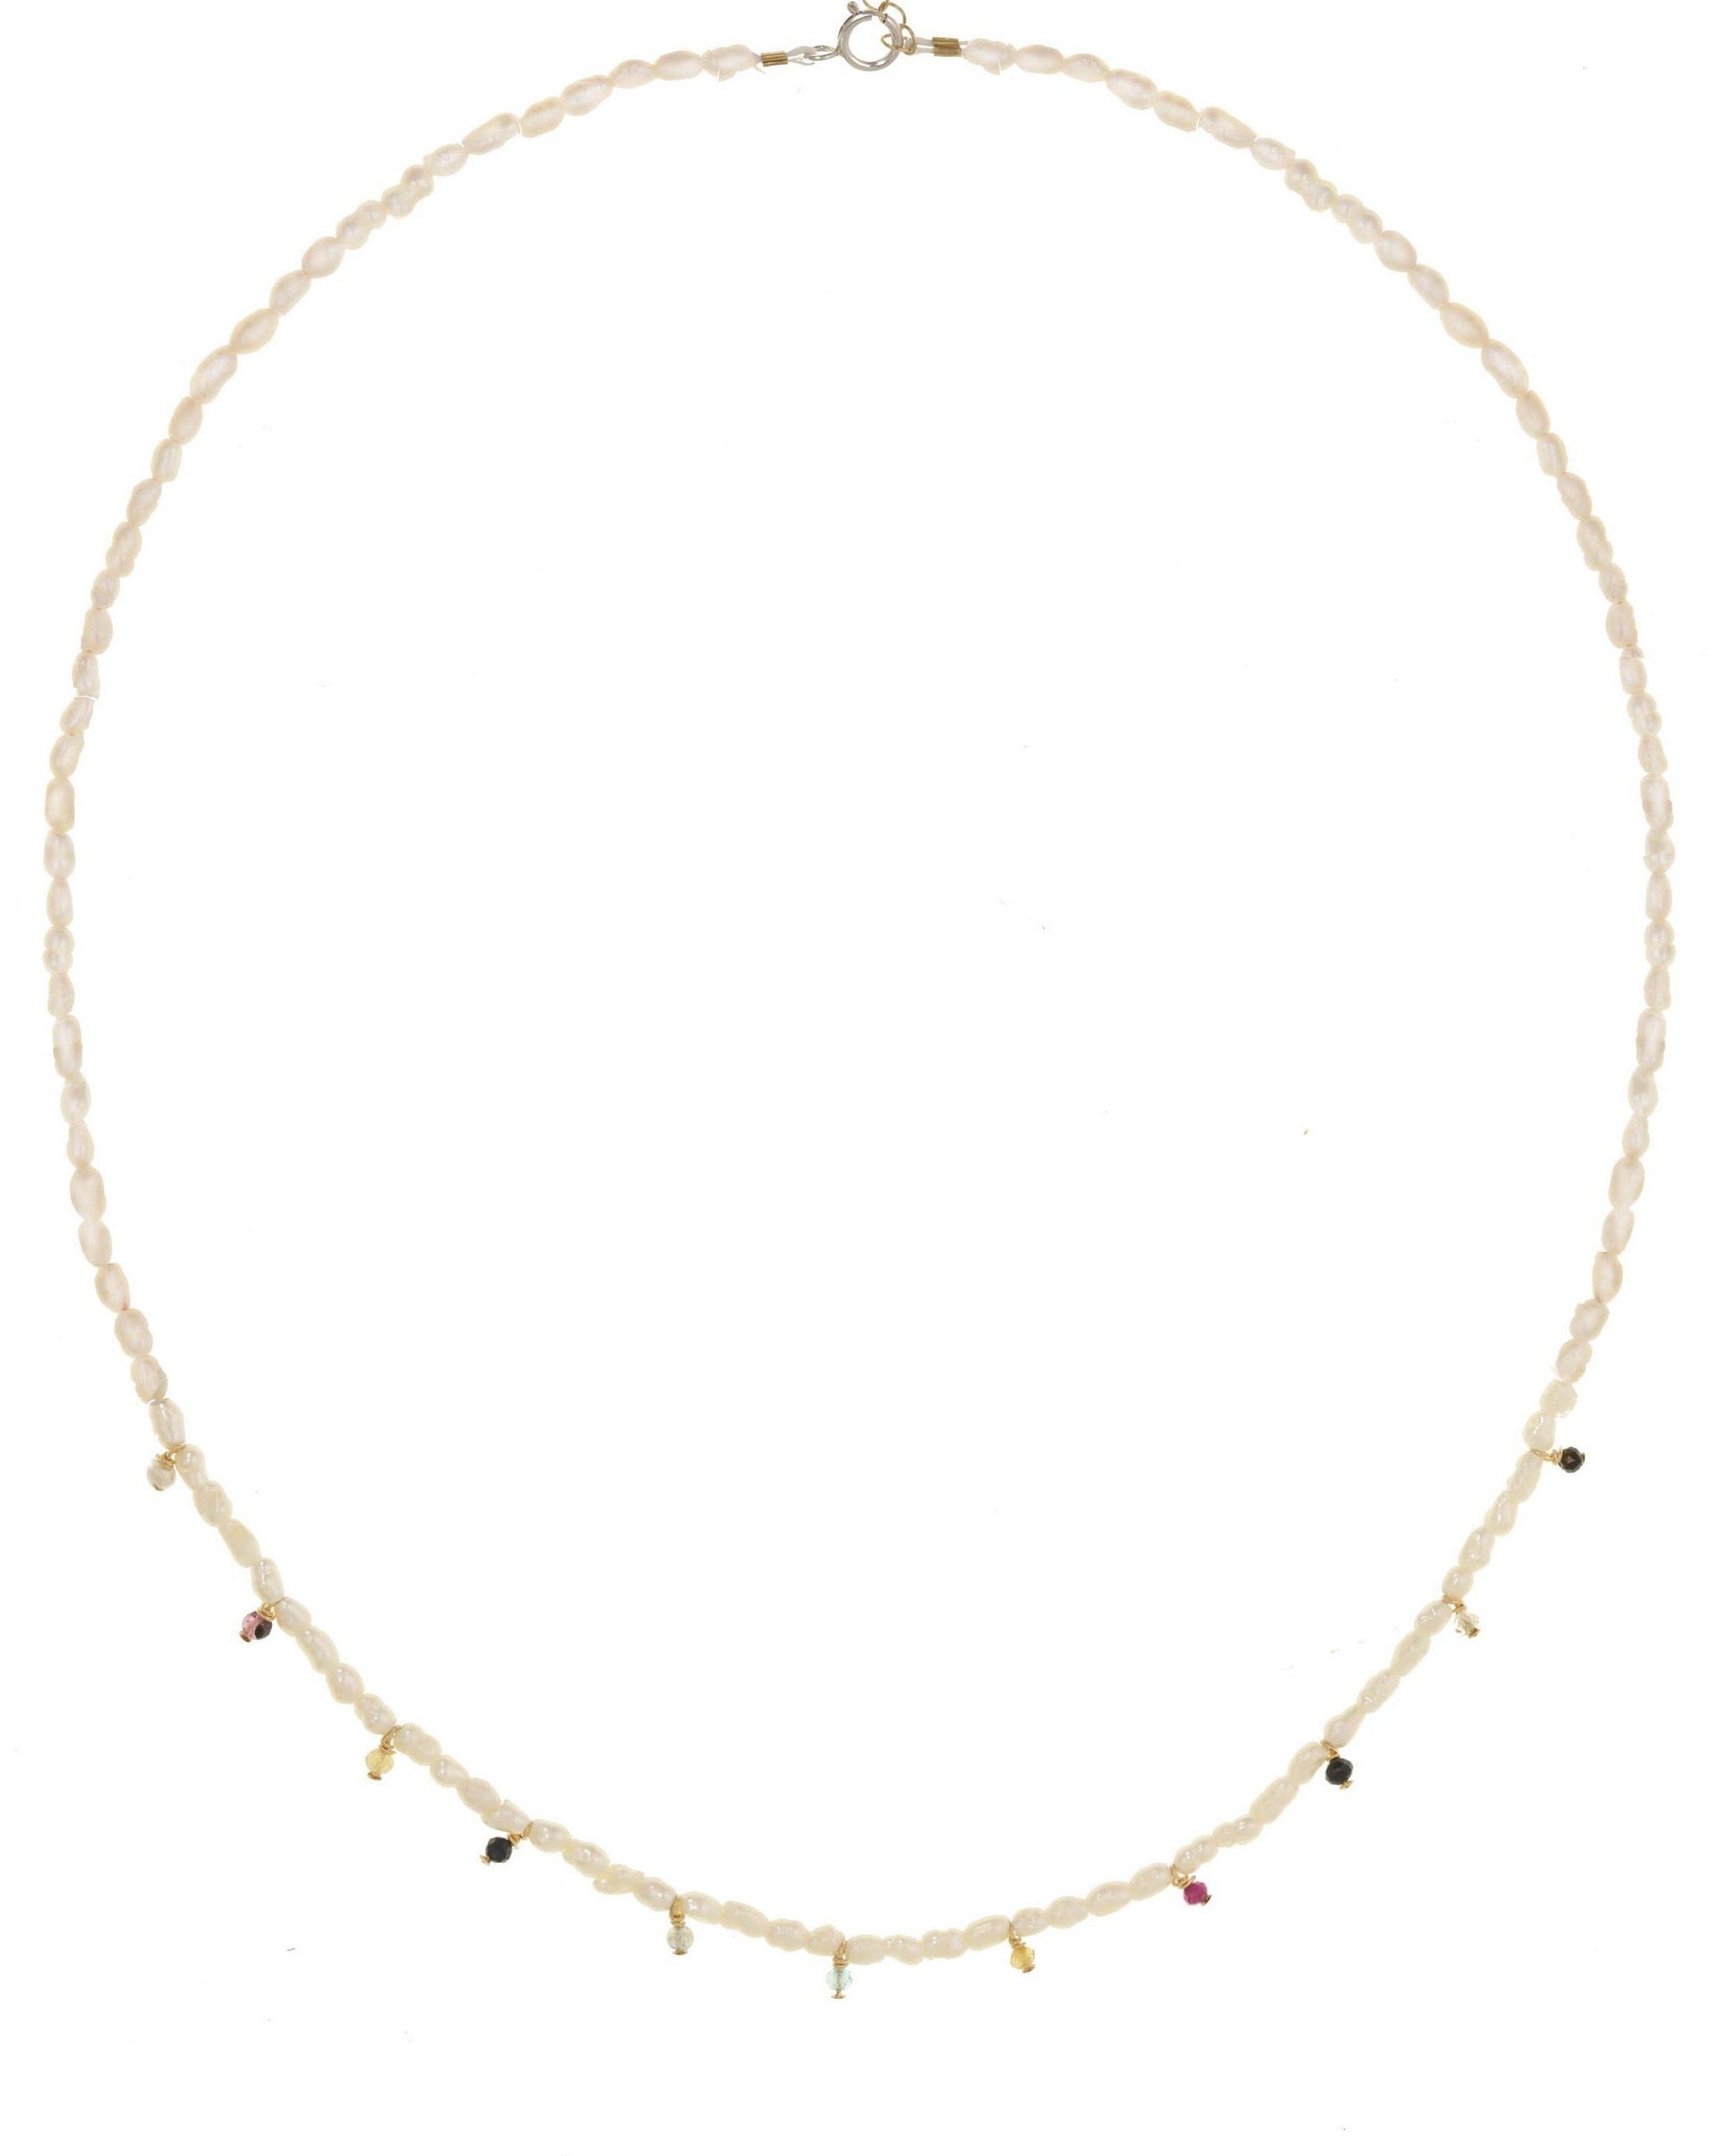 Fiesta Necklace by KOZAKH. A 16 to 18 inch long strand of Freshwater Rice Pearl necklace, crafted in 14K Gold Filled, featuring Aquamarine, Sapphire, Ruby, and Tourmaline gemstones.